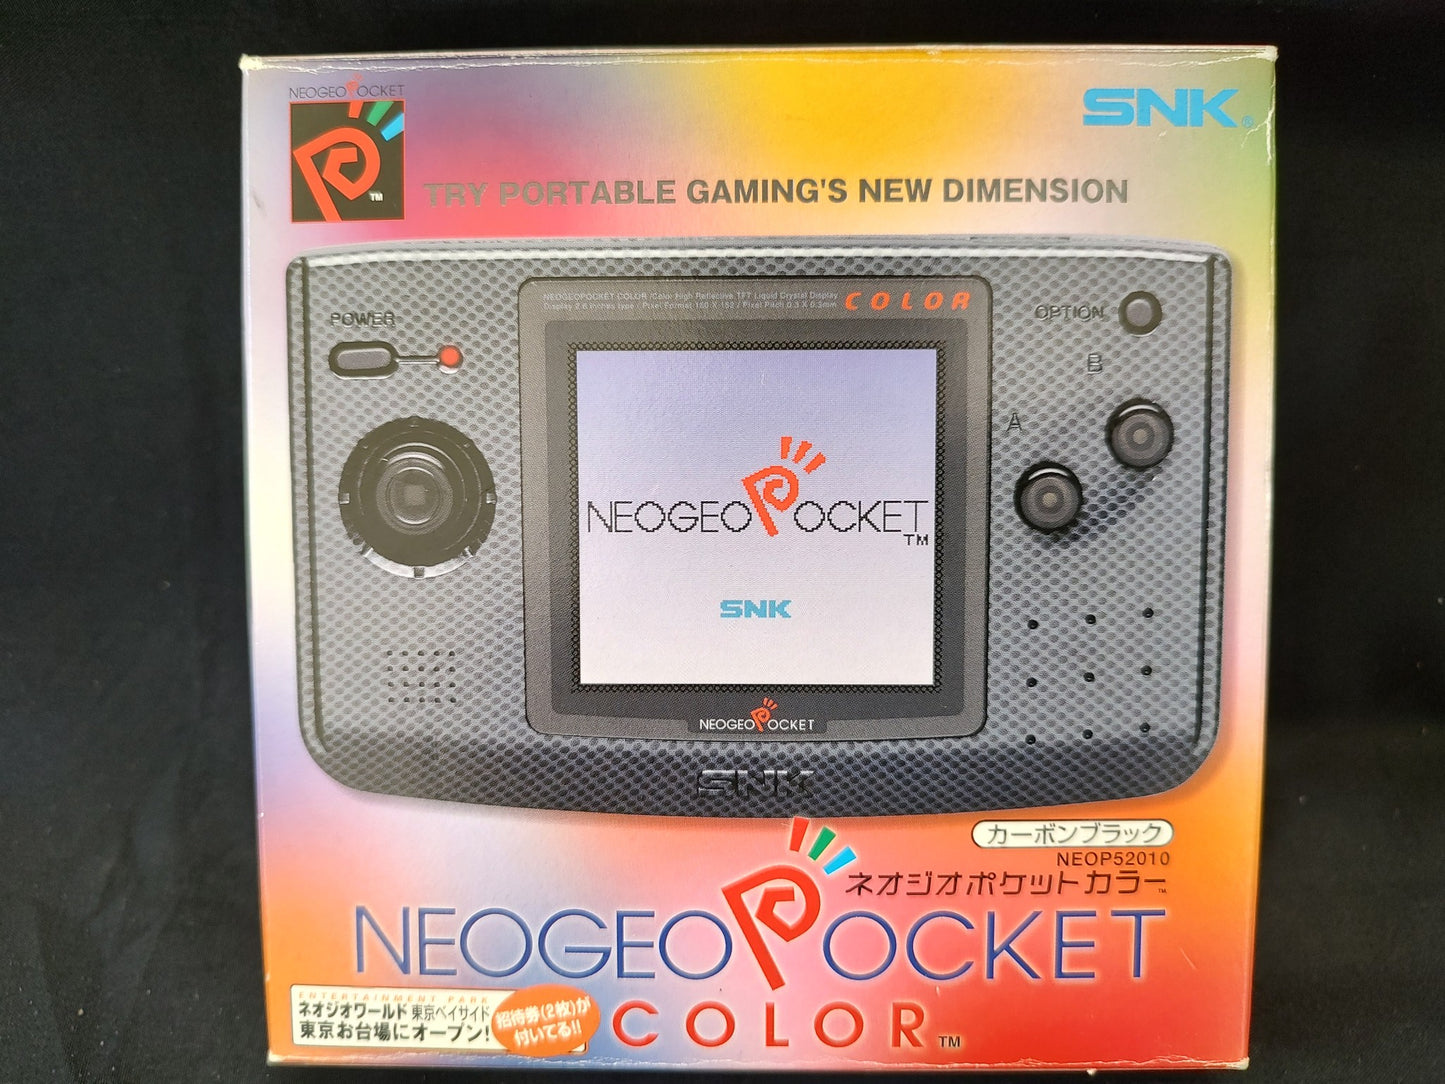 SNK NEOGEO POCKET Color Carbon Black Console and box set, Working-f1124-